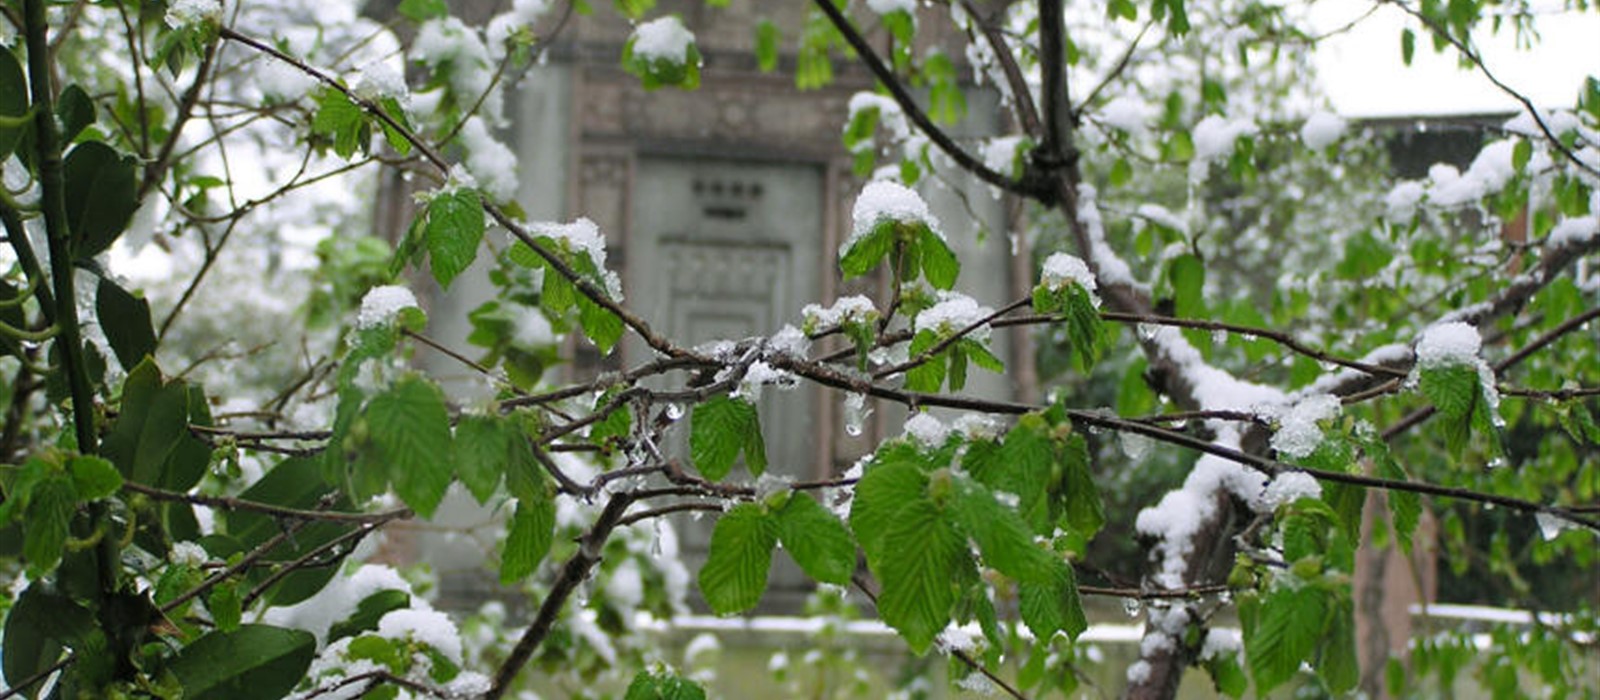 A mausoleum visible through snow covered tree branches